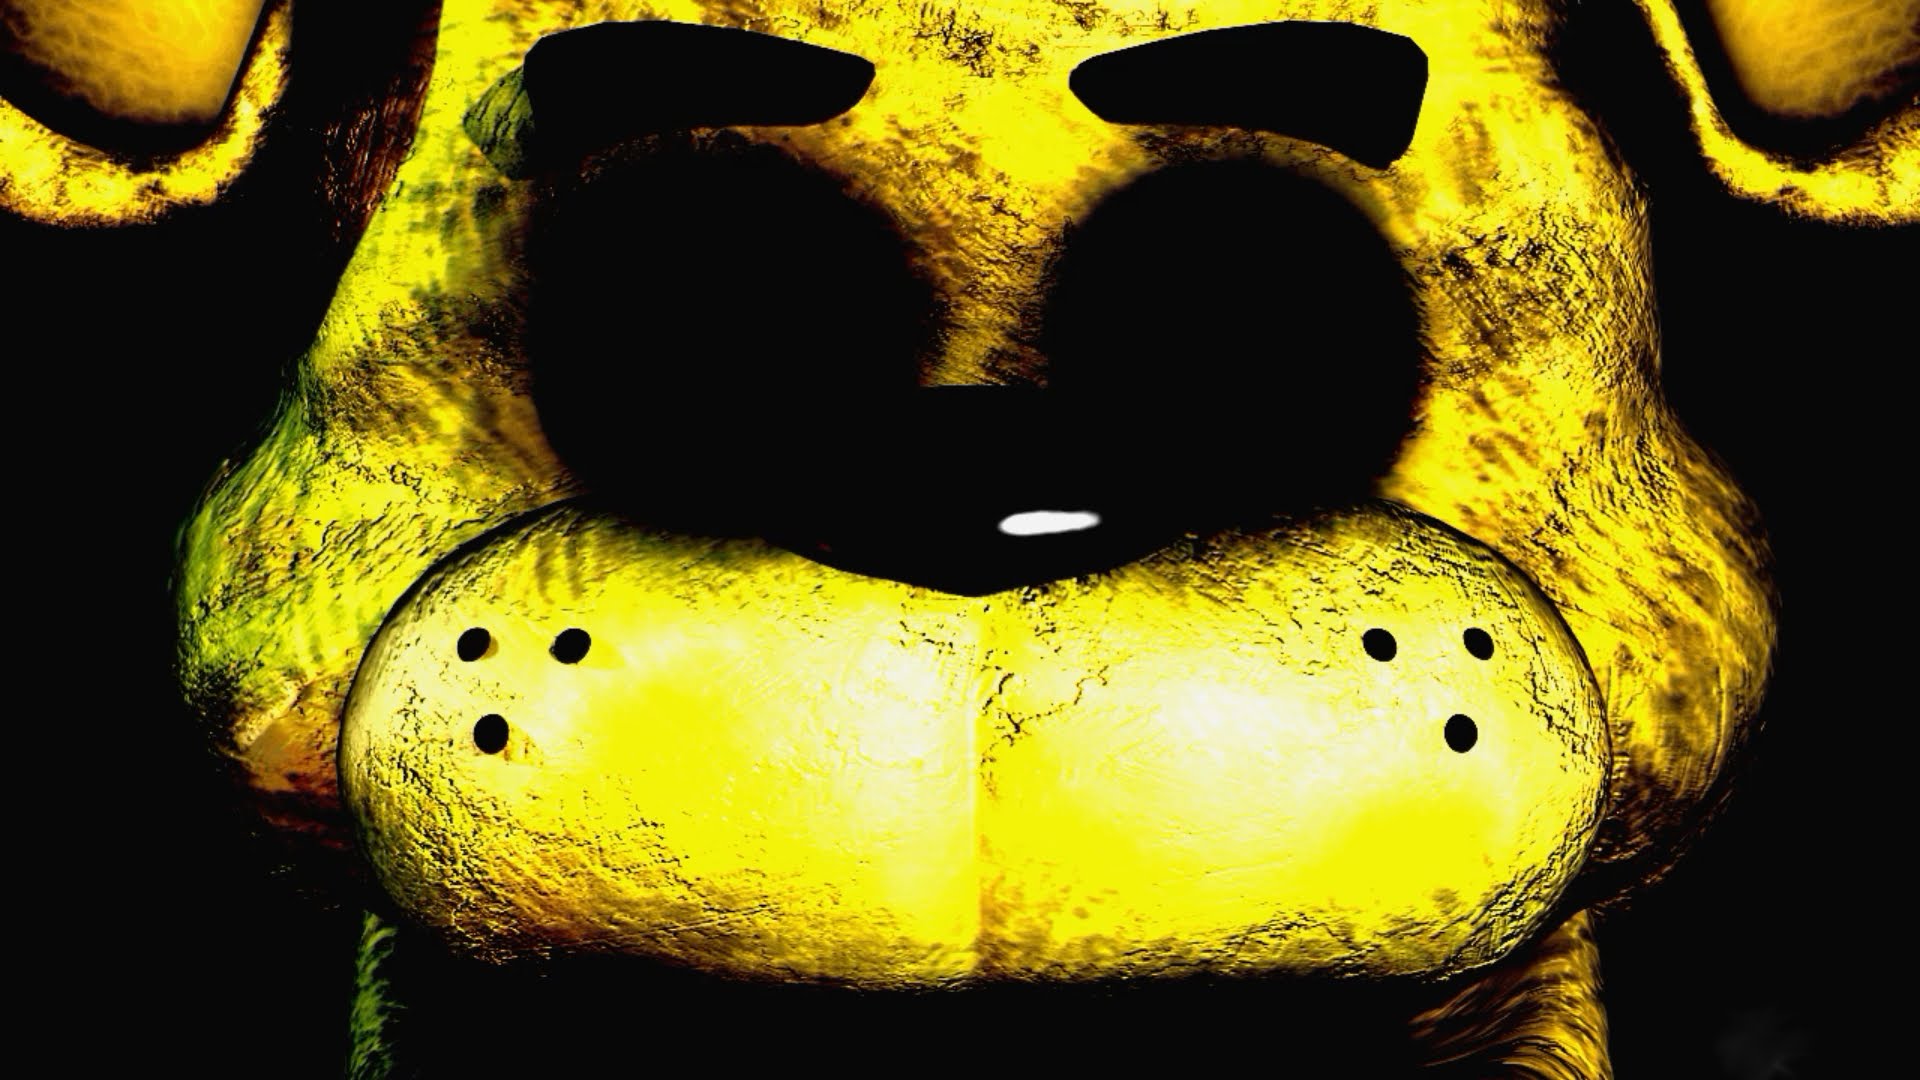 Is golde freddy is the fredbear from sister location? They have